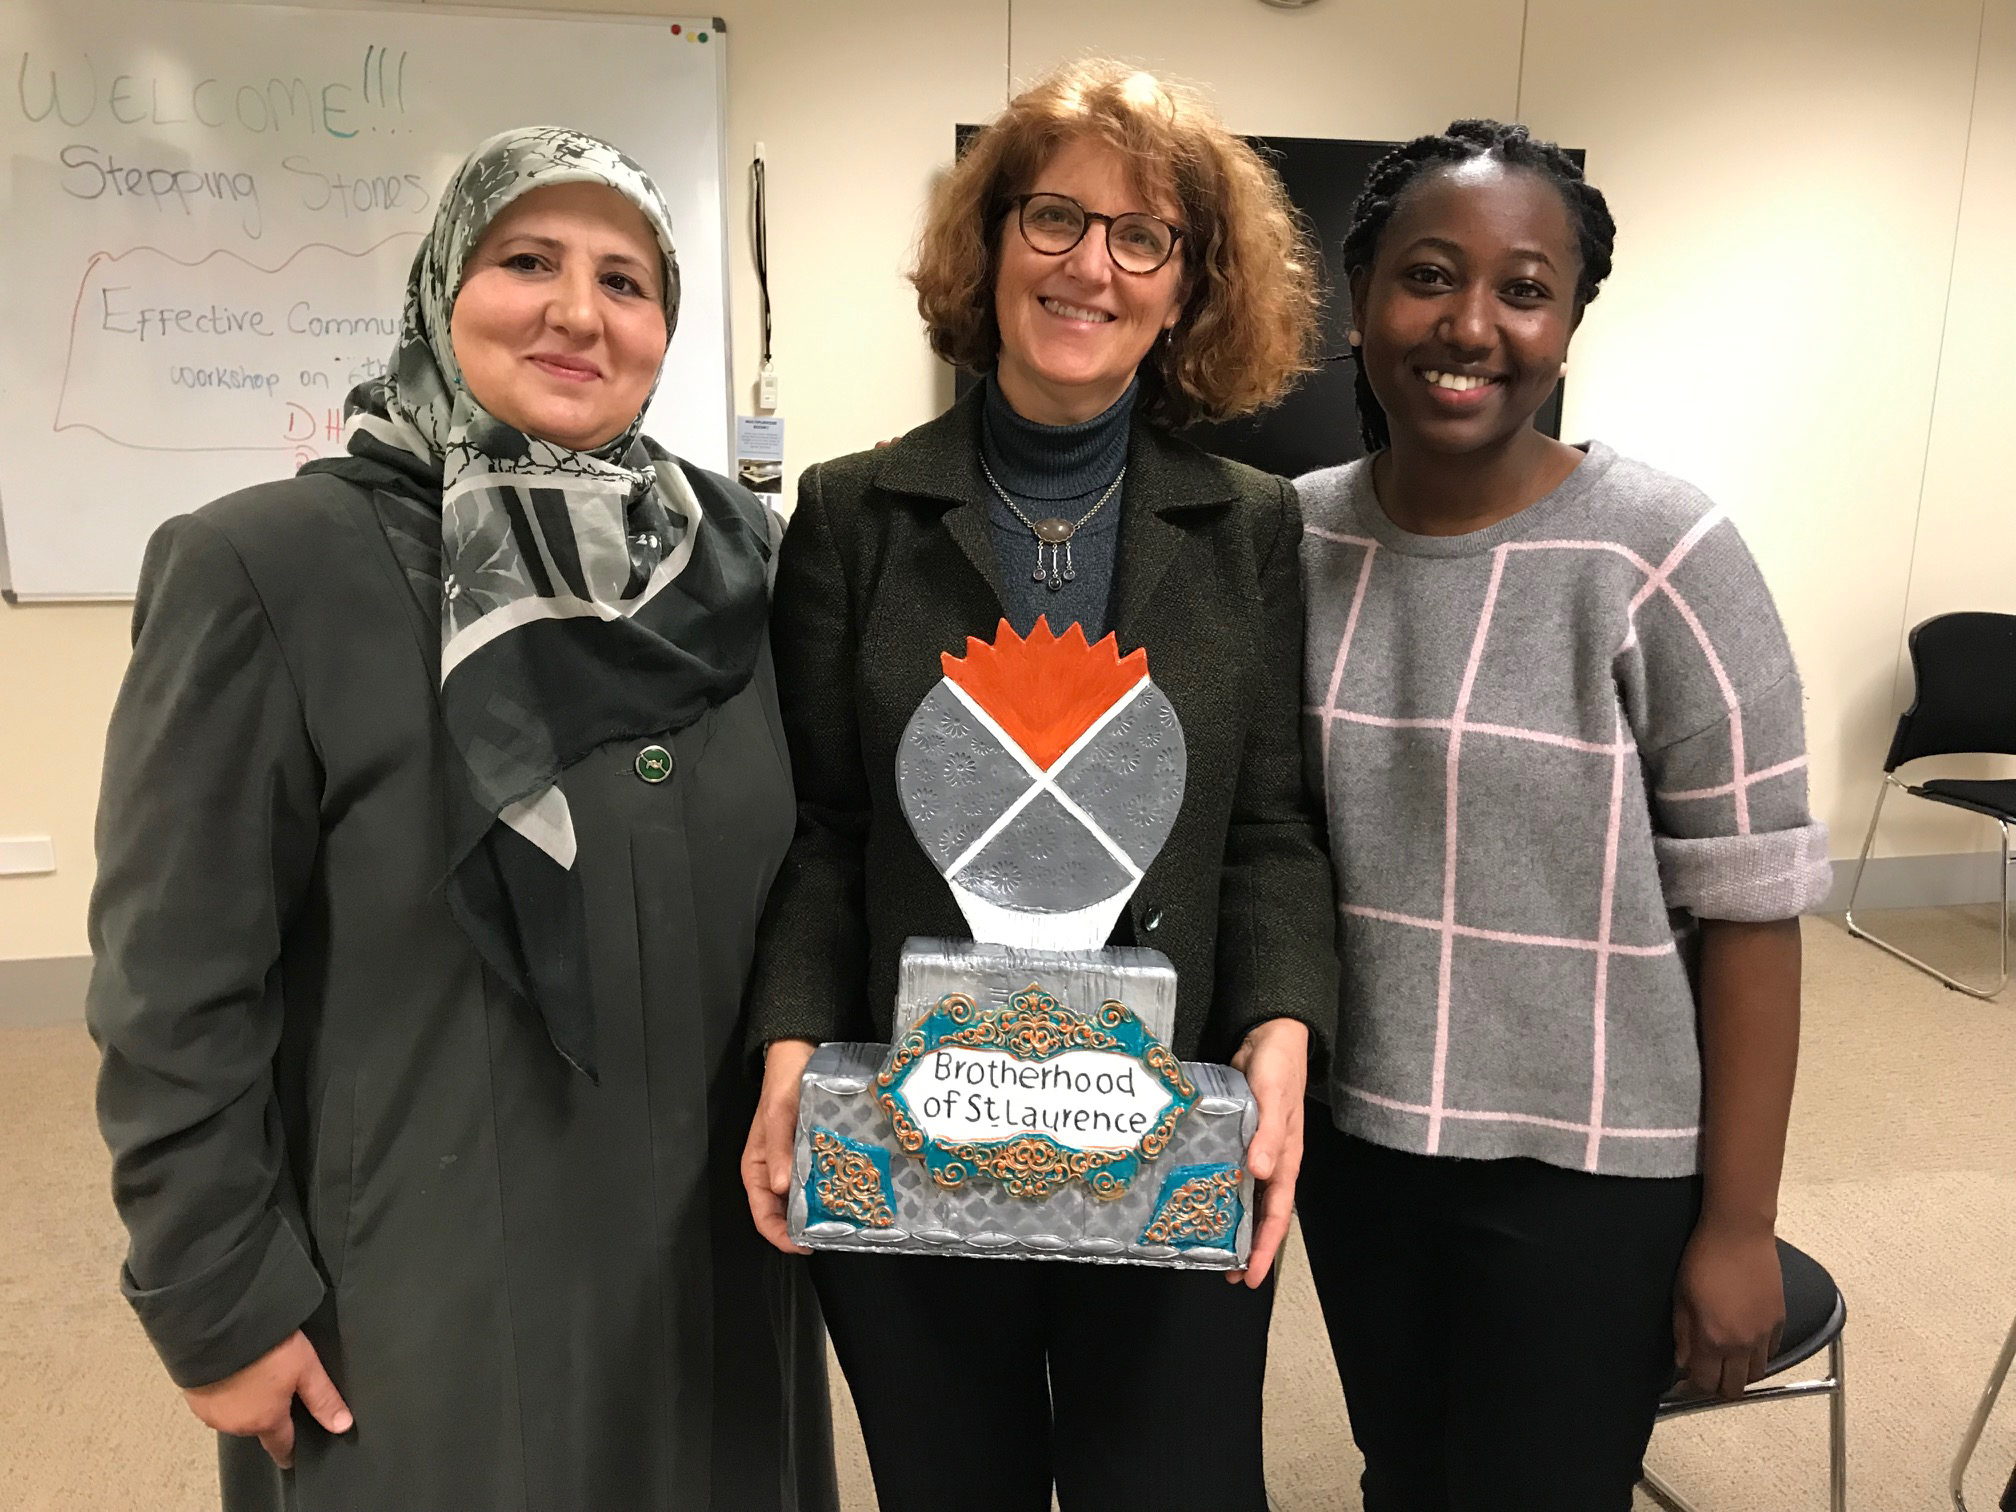 Linet and Meredith from our Multicultural Communities team with Ahlam who started her own business, Cookies by Dreams, through our Stepping Stones to Small business program, and made this incredible, edible trophy for the team. 